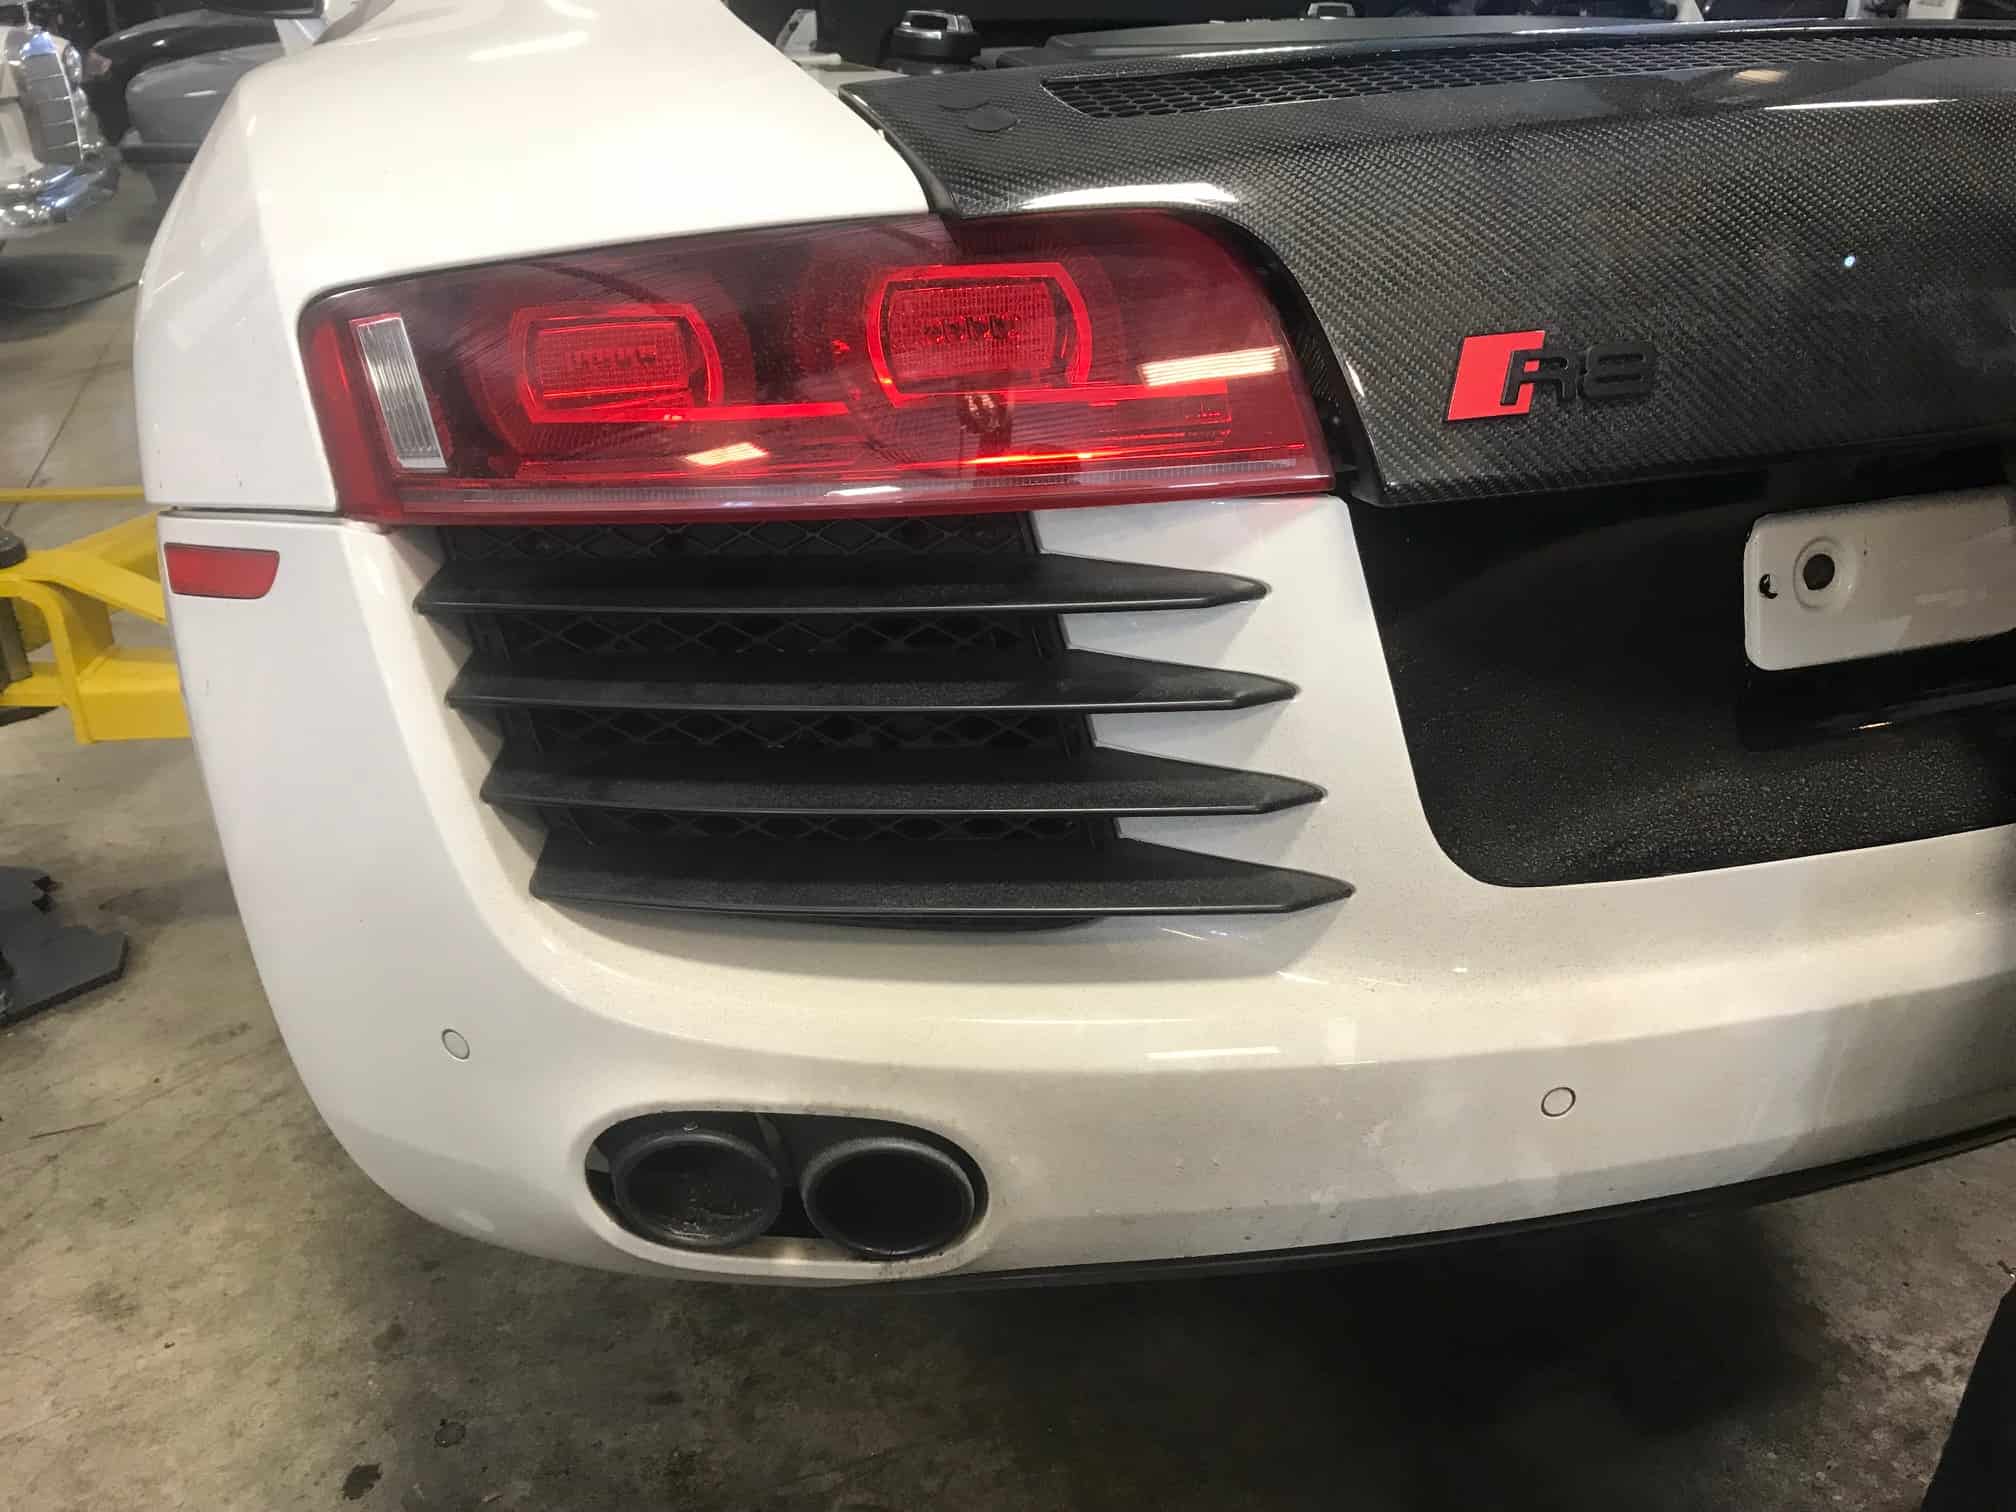 Audi R8 Exhaust Replaced back to Stock (25) | Car Repair, & Performance